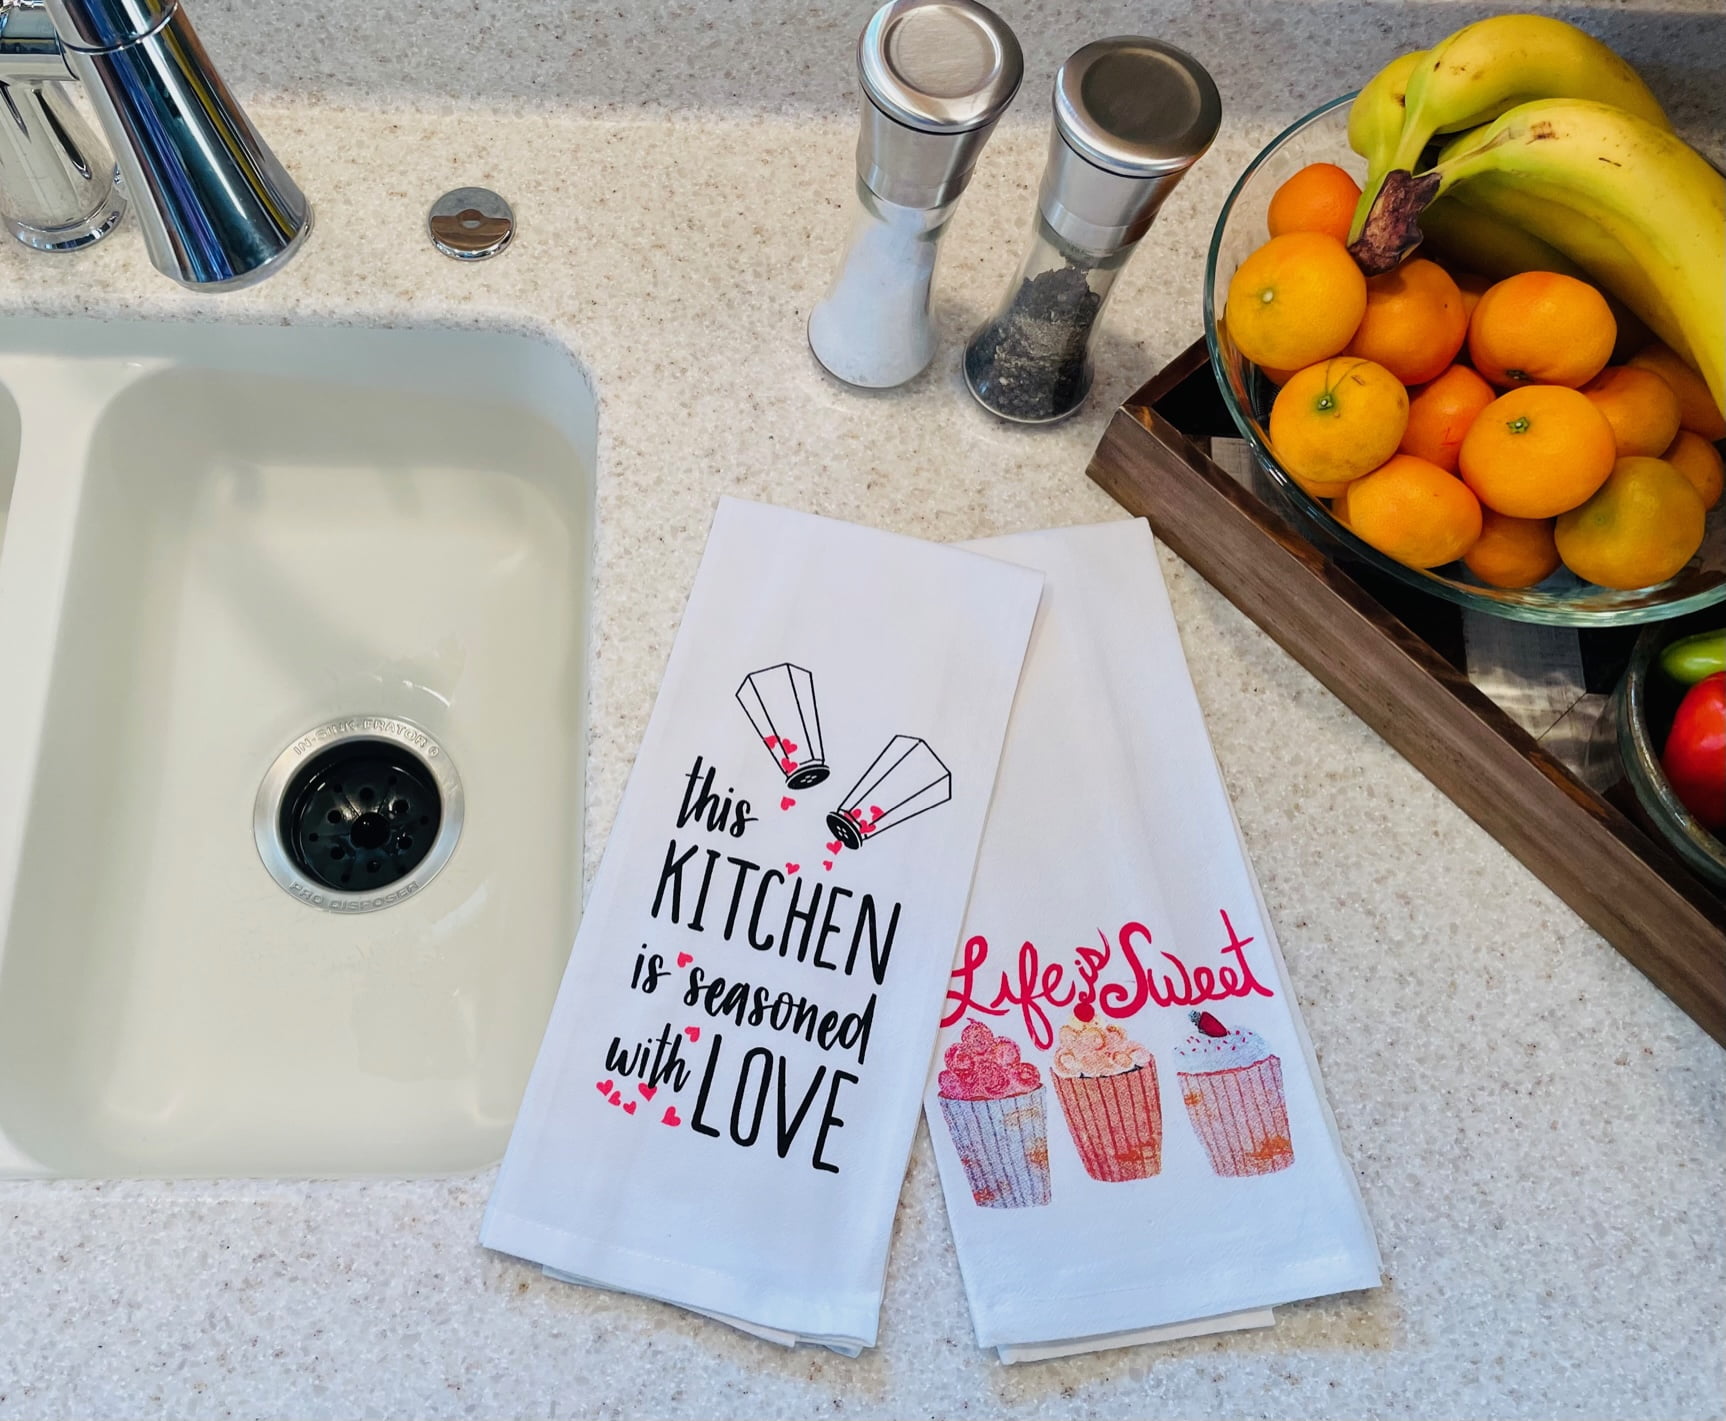 If I Have to Stir It It's Homemade Kitchen Towel: Funny Kitchen Accessories  – LuLu Grace